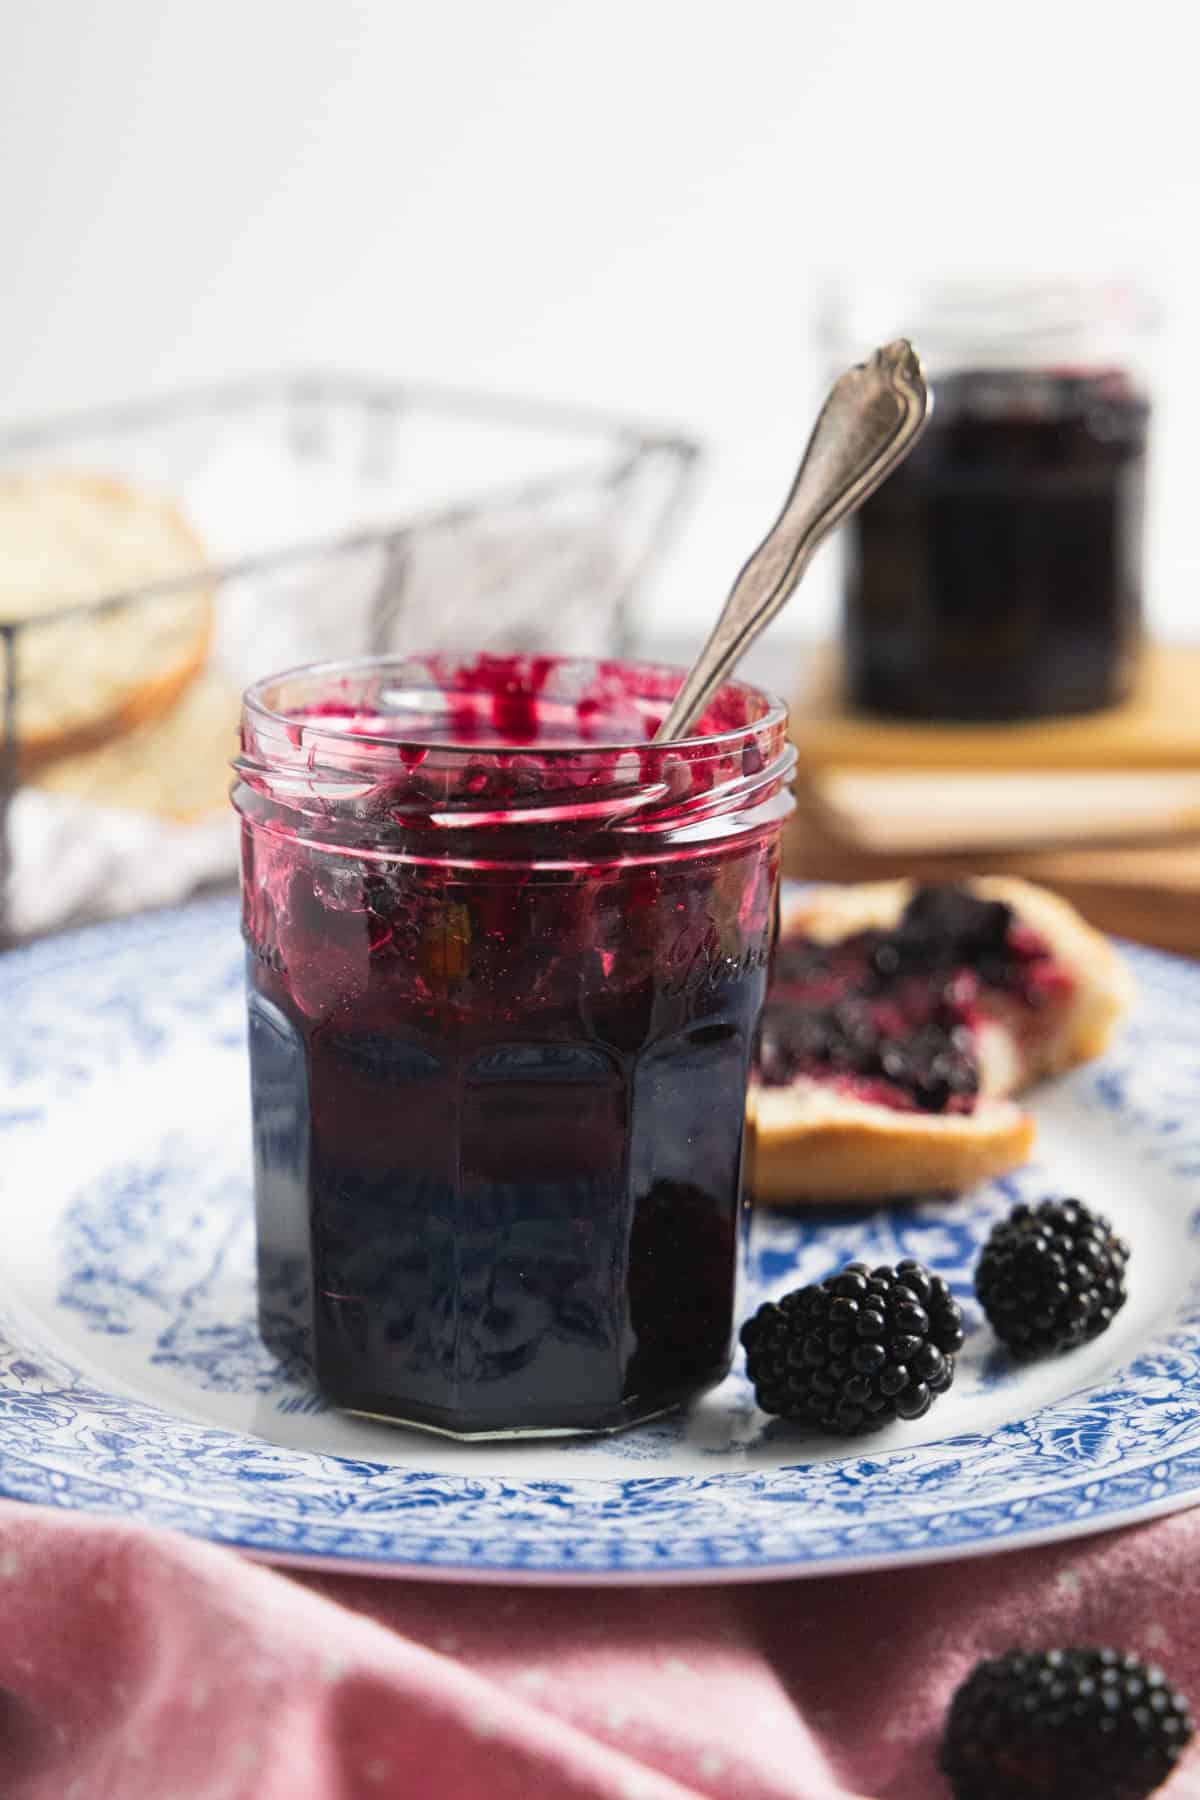 Side view of the jam jar with a spoon in it, placed on the blue plate and few fresh berries on the side. 